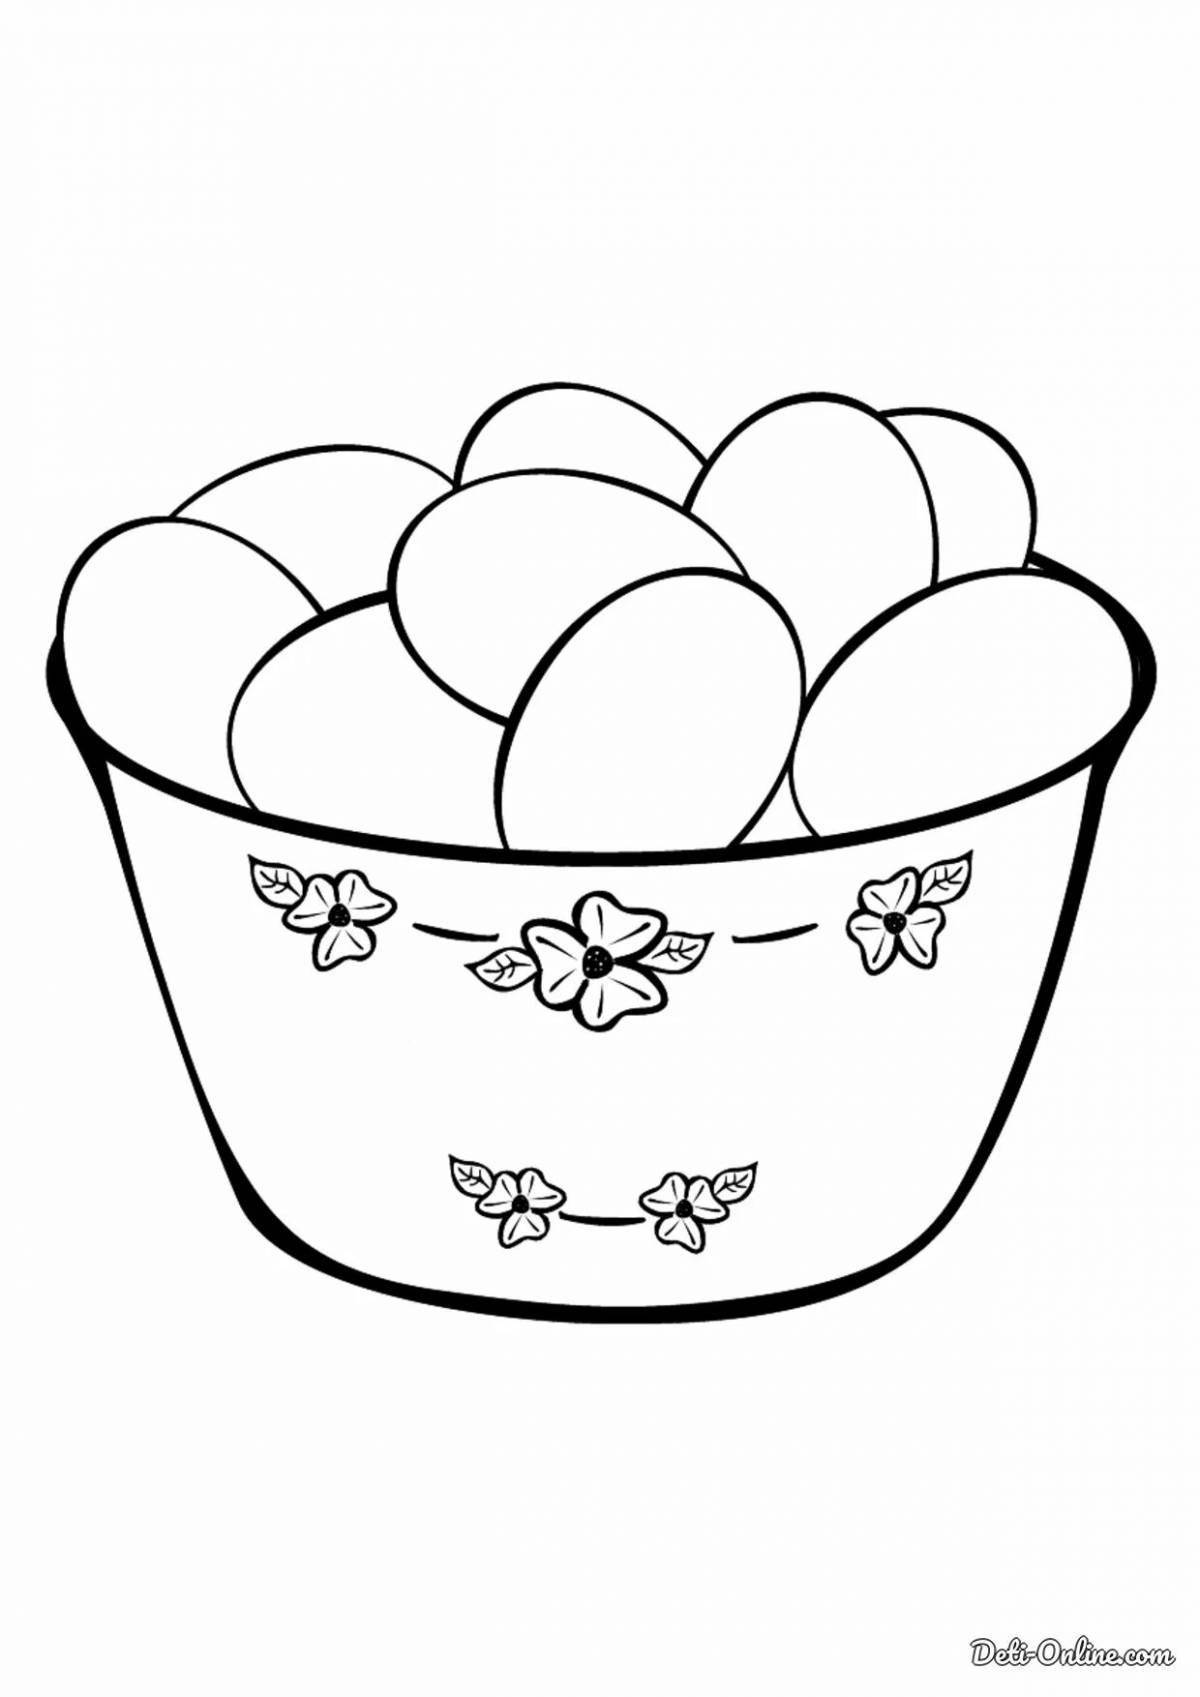 Great coloring bowl for toddlers